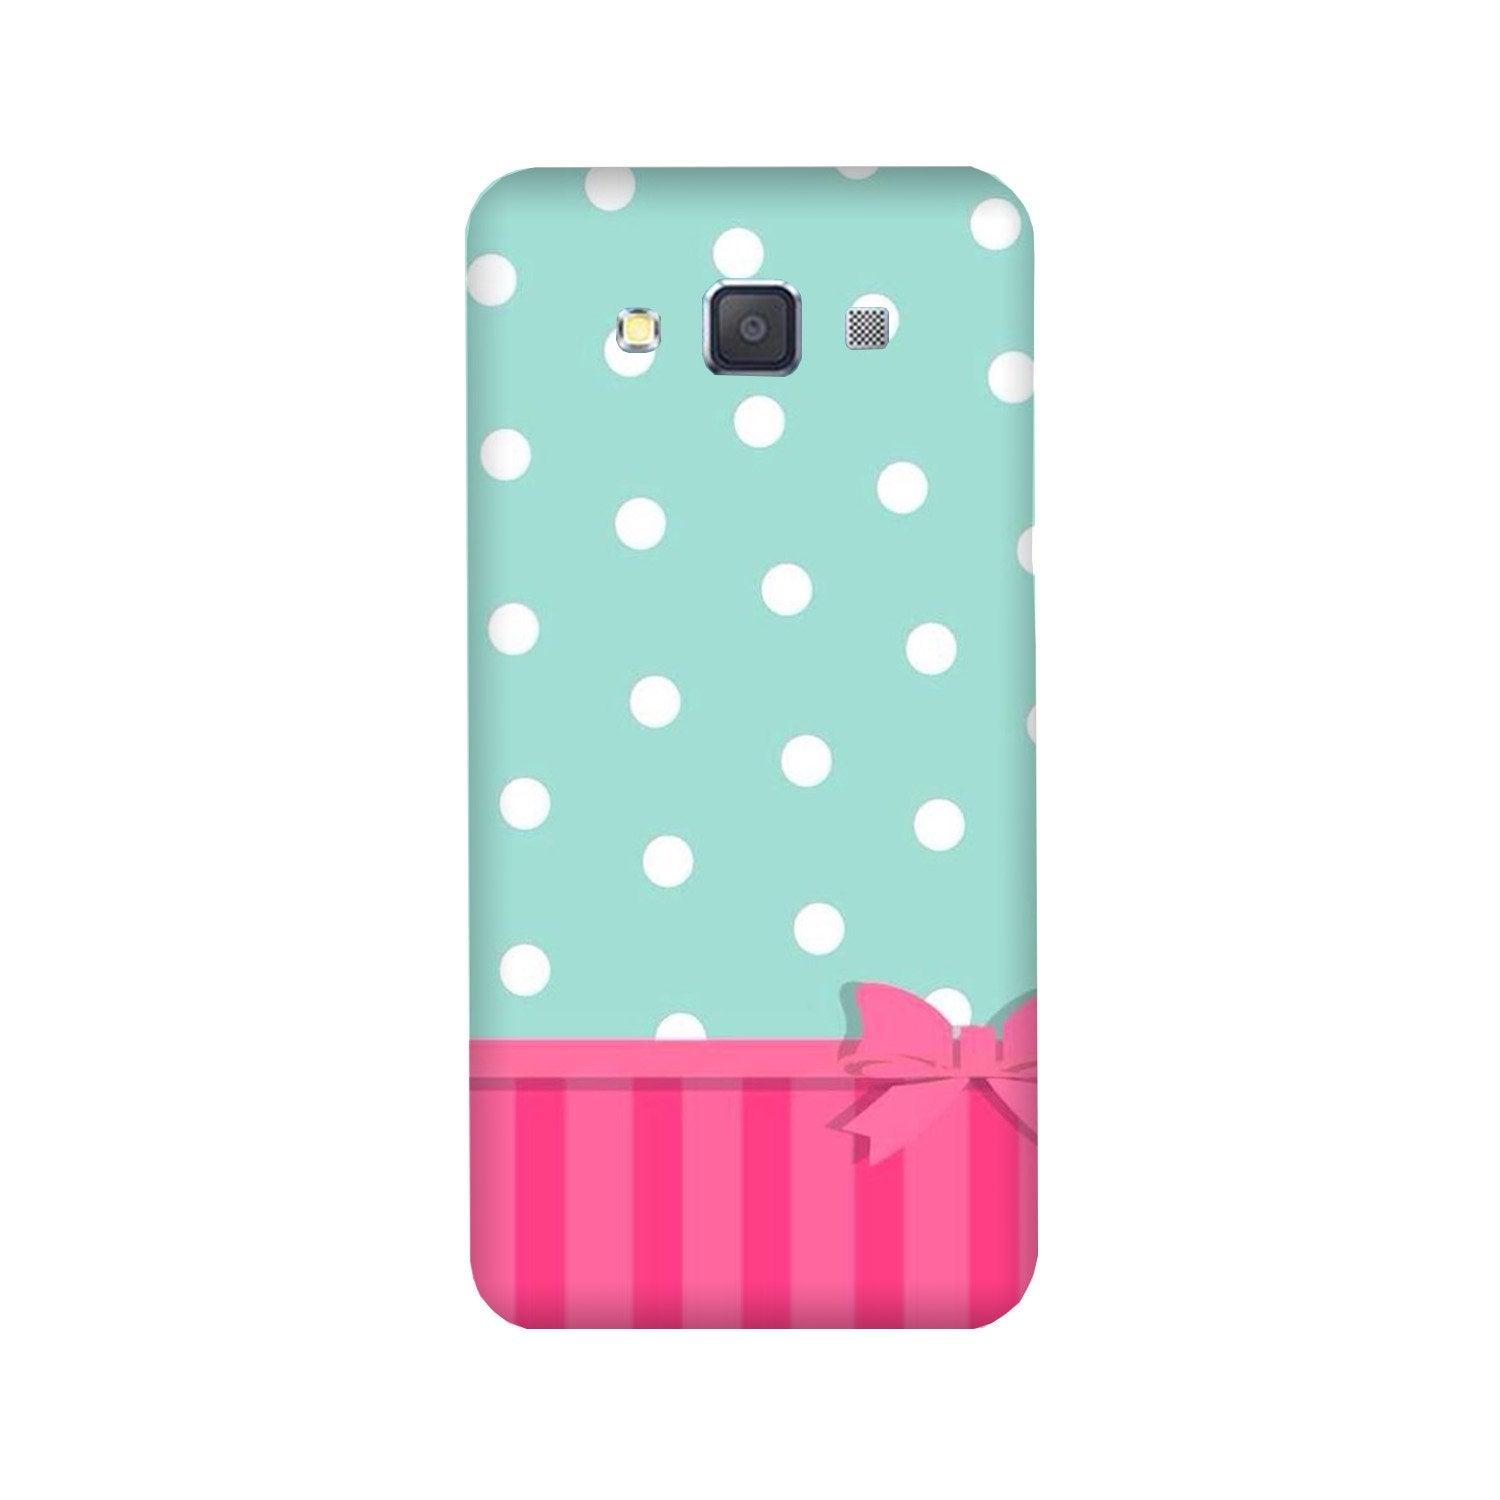 Gift Wrap Case for Galaxy ON7/ON7 Pro